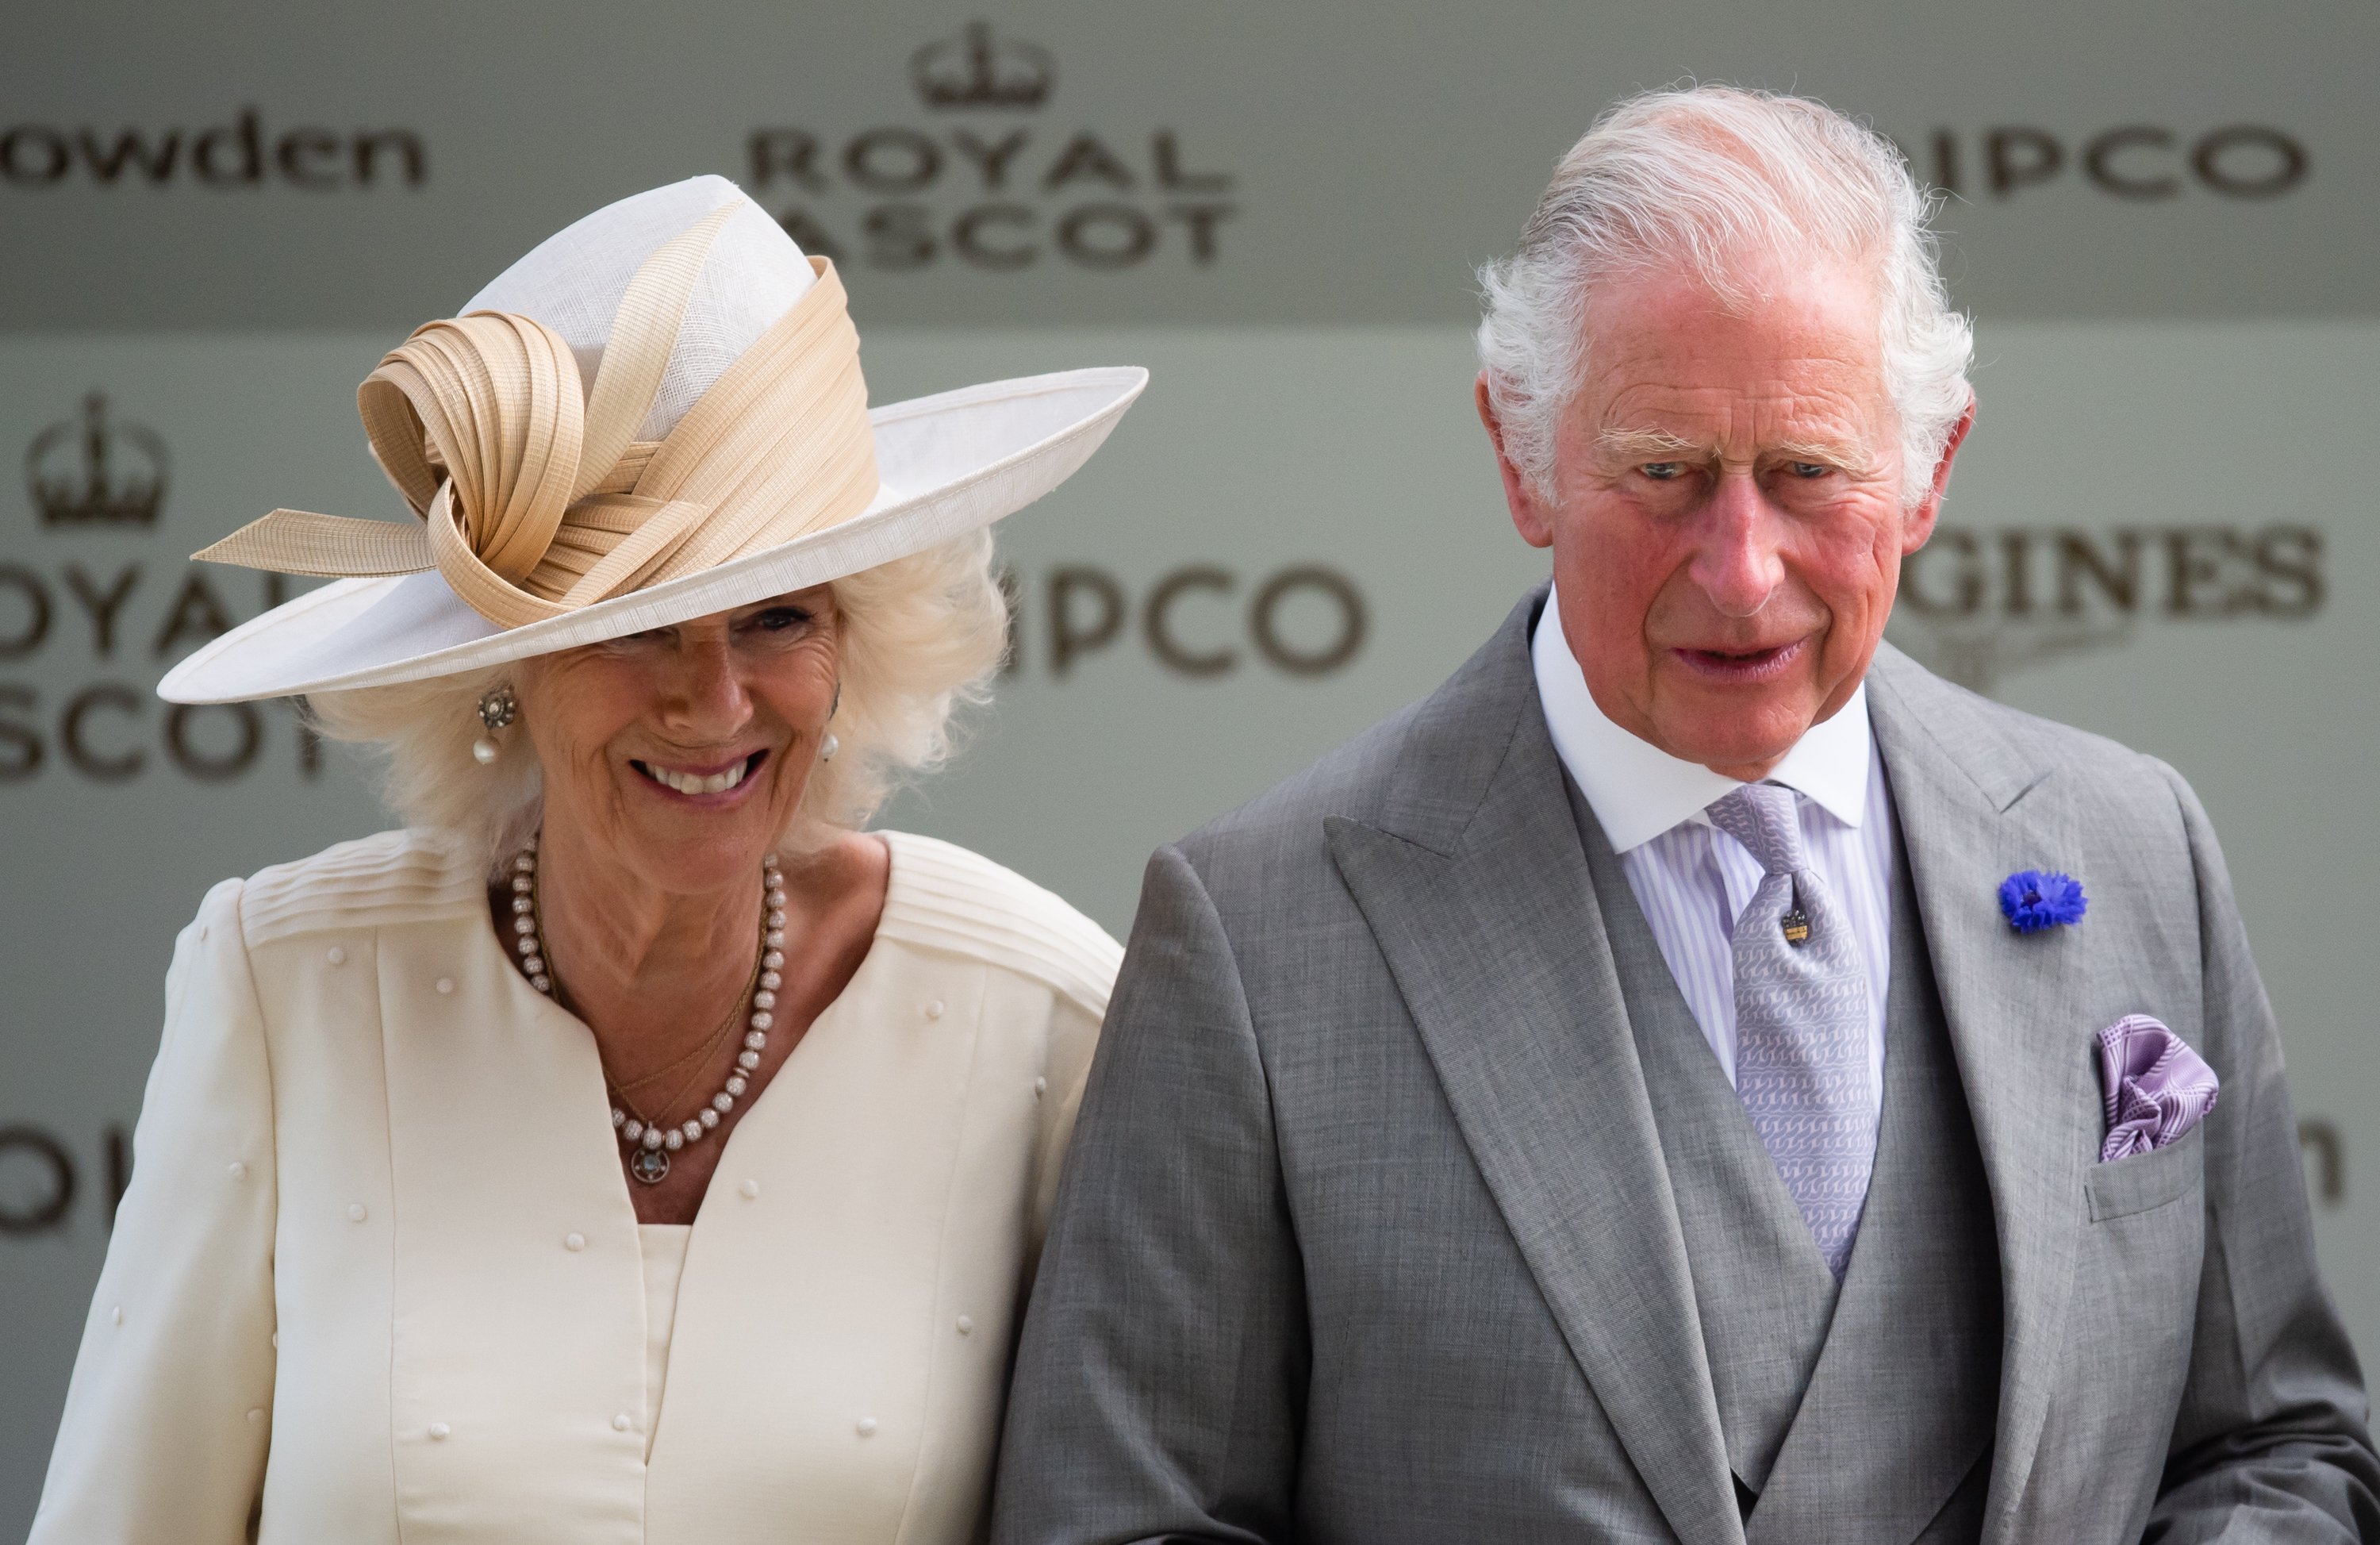 Camilla, Duchess of Cornwall and Prince Charles, Prince of Wales attend Royal Ascot 2021 at Ascot Racecourse on June 16, 2021 in Ascot, England | Photo: Getty Images